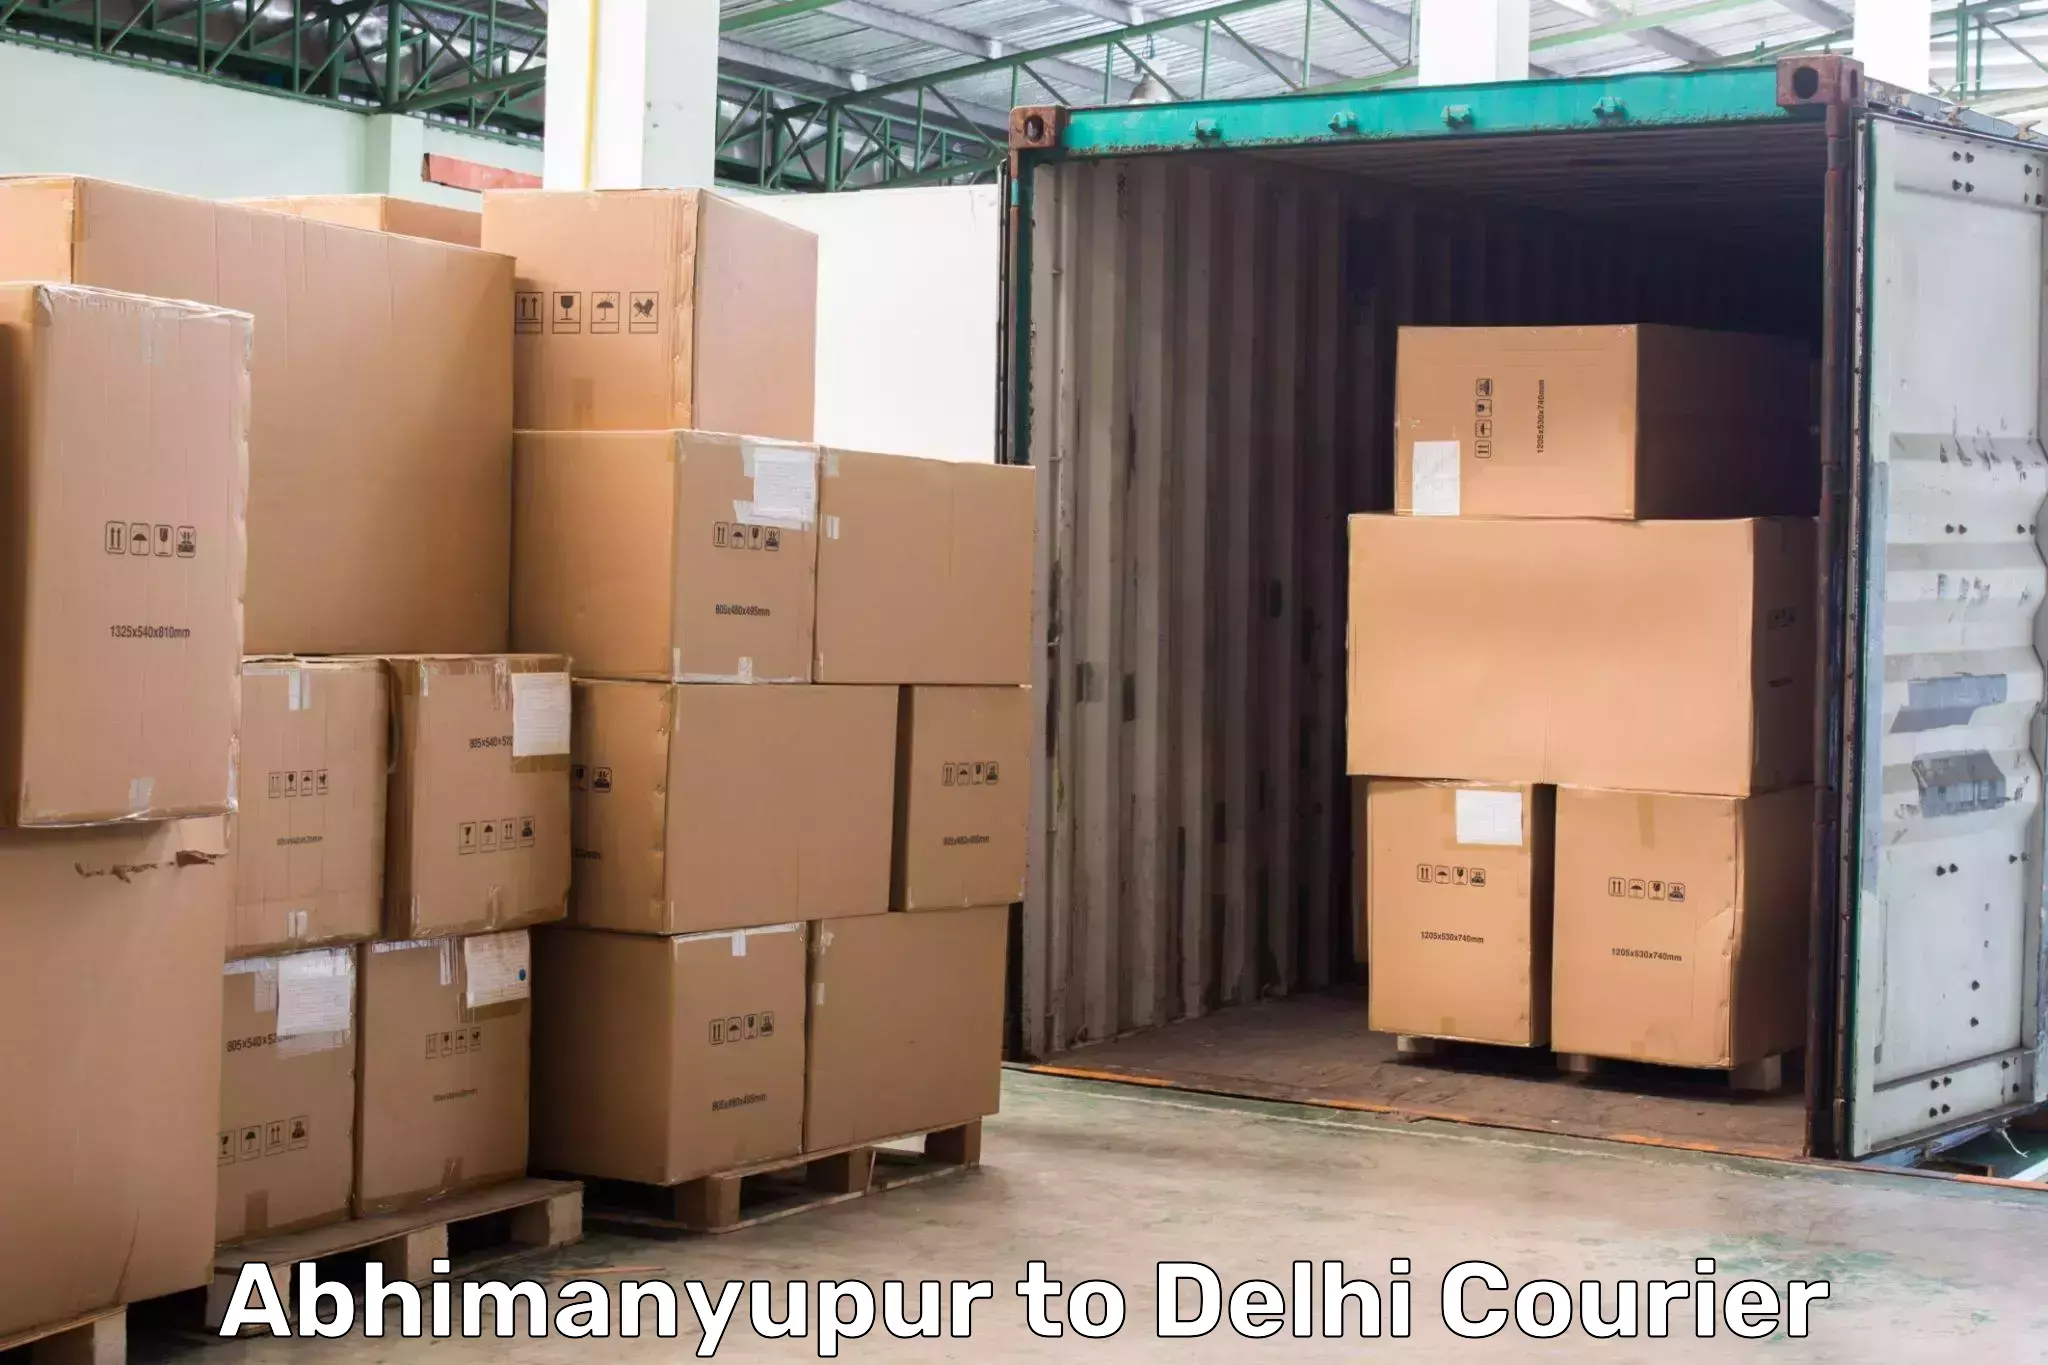 Reliable parcel services Abhimanyupur to Jawaharlal Nehru University New Delhi